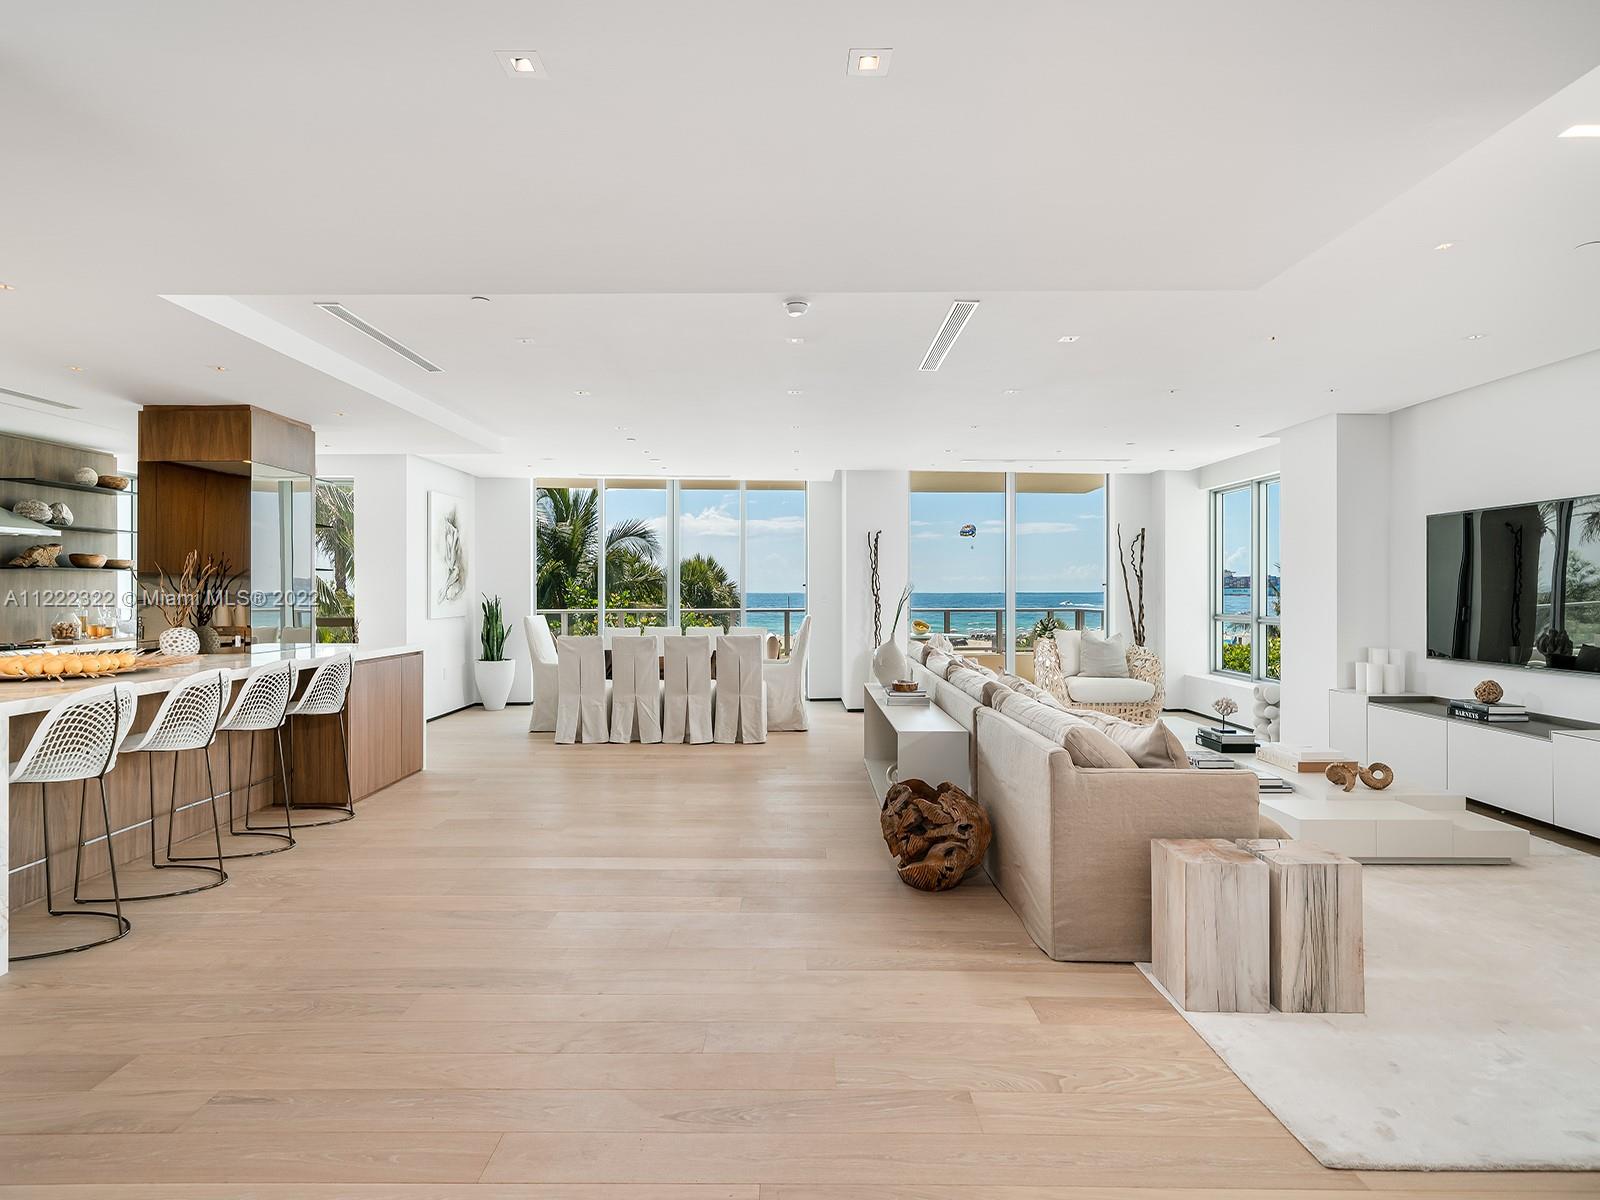 This exquisite residence at Ocean House, an ultra-high-end boutique address in Miami Beach’s coveted South-of-Fifth enclave, offers privacy, luxury, and spectacular ocean views. Recently renovated, the sprawling 4,068 square foot, four-bed, and four-and-a-half-bath home includes a luxurious master suite with a dressing room and spa-like bathroom. No detail has been overlooked, including the private elevator entry, large balconies, massive great room, Crestron smart home system, and the option to be delivered turnkey and fully furnished by Artefacto. Enjoy an extensive roster of amenities, including stunning common areas designed by Antrobus + Ramirez, screening